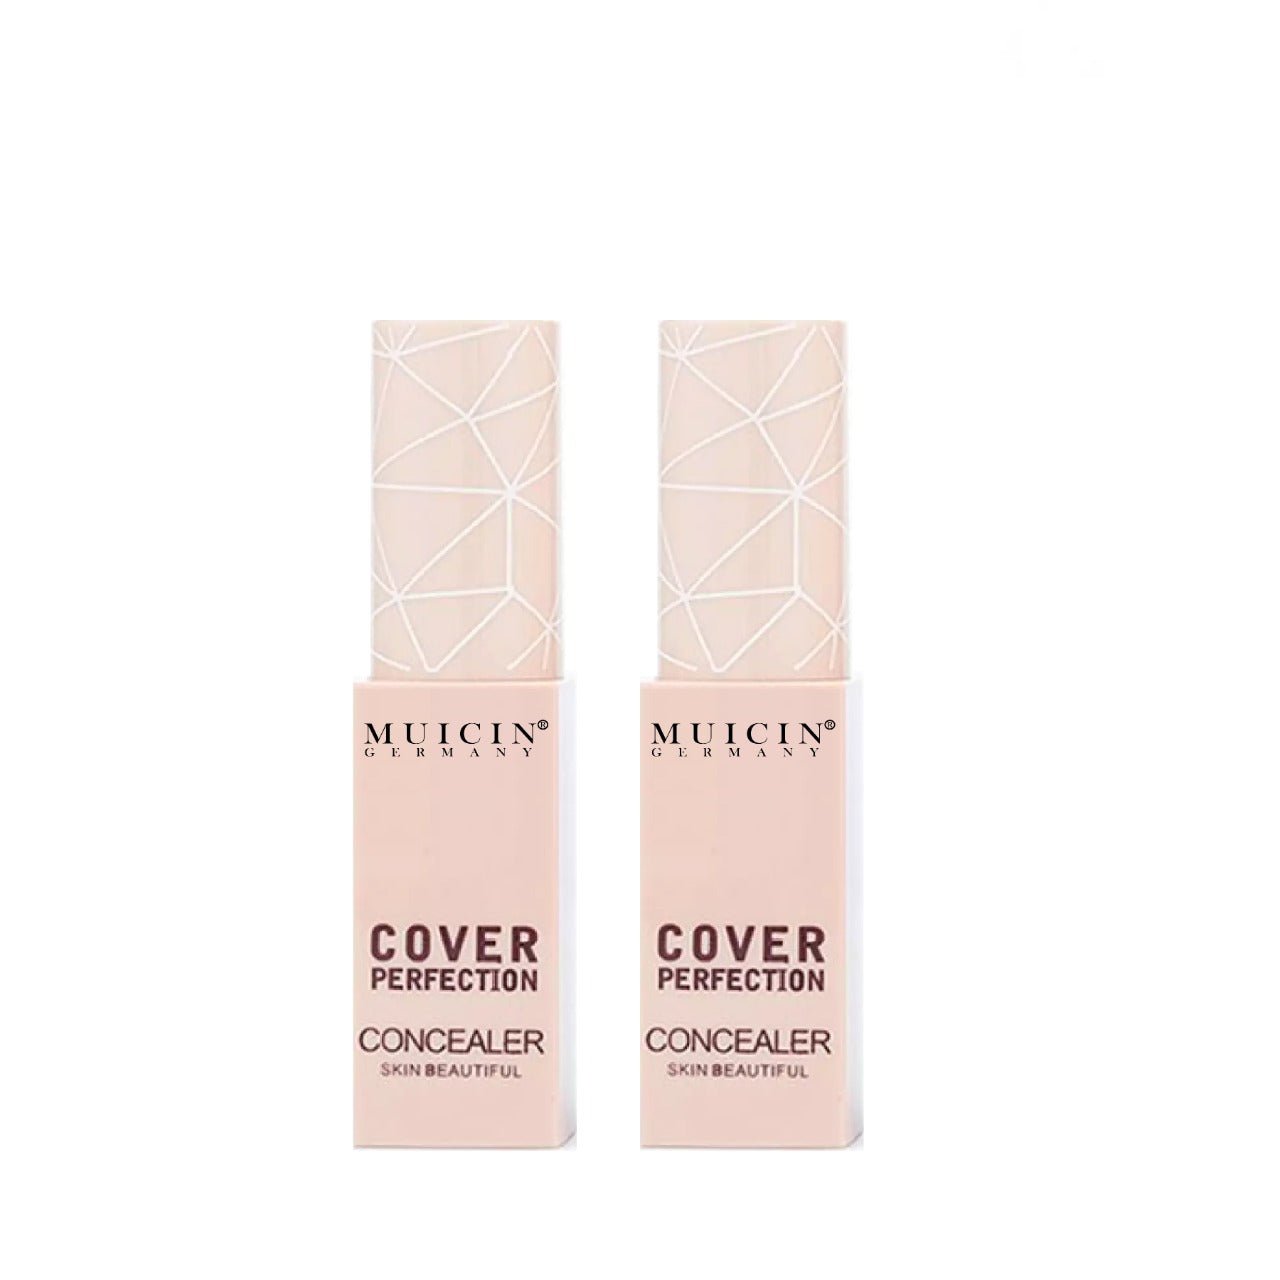 MUICIIN COVER PERFECTION CONCEALER 